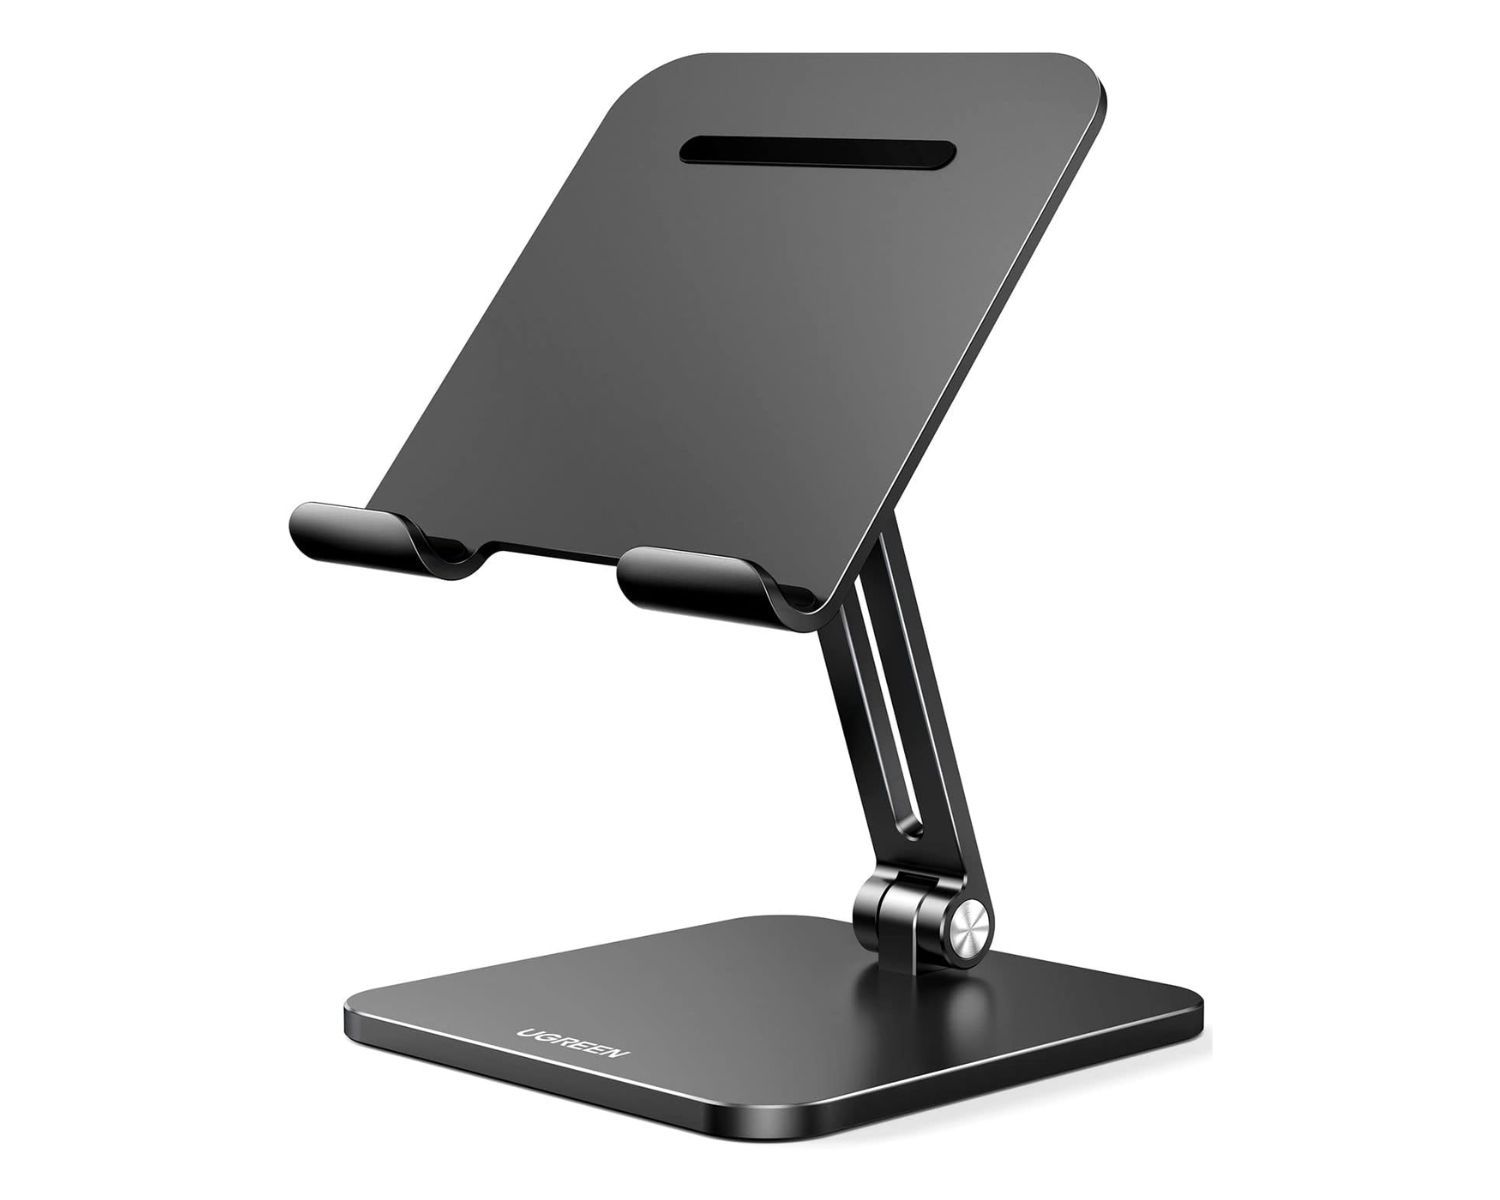 Tablet Stand Review: Find the Perfect Stand for Your Device